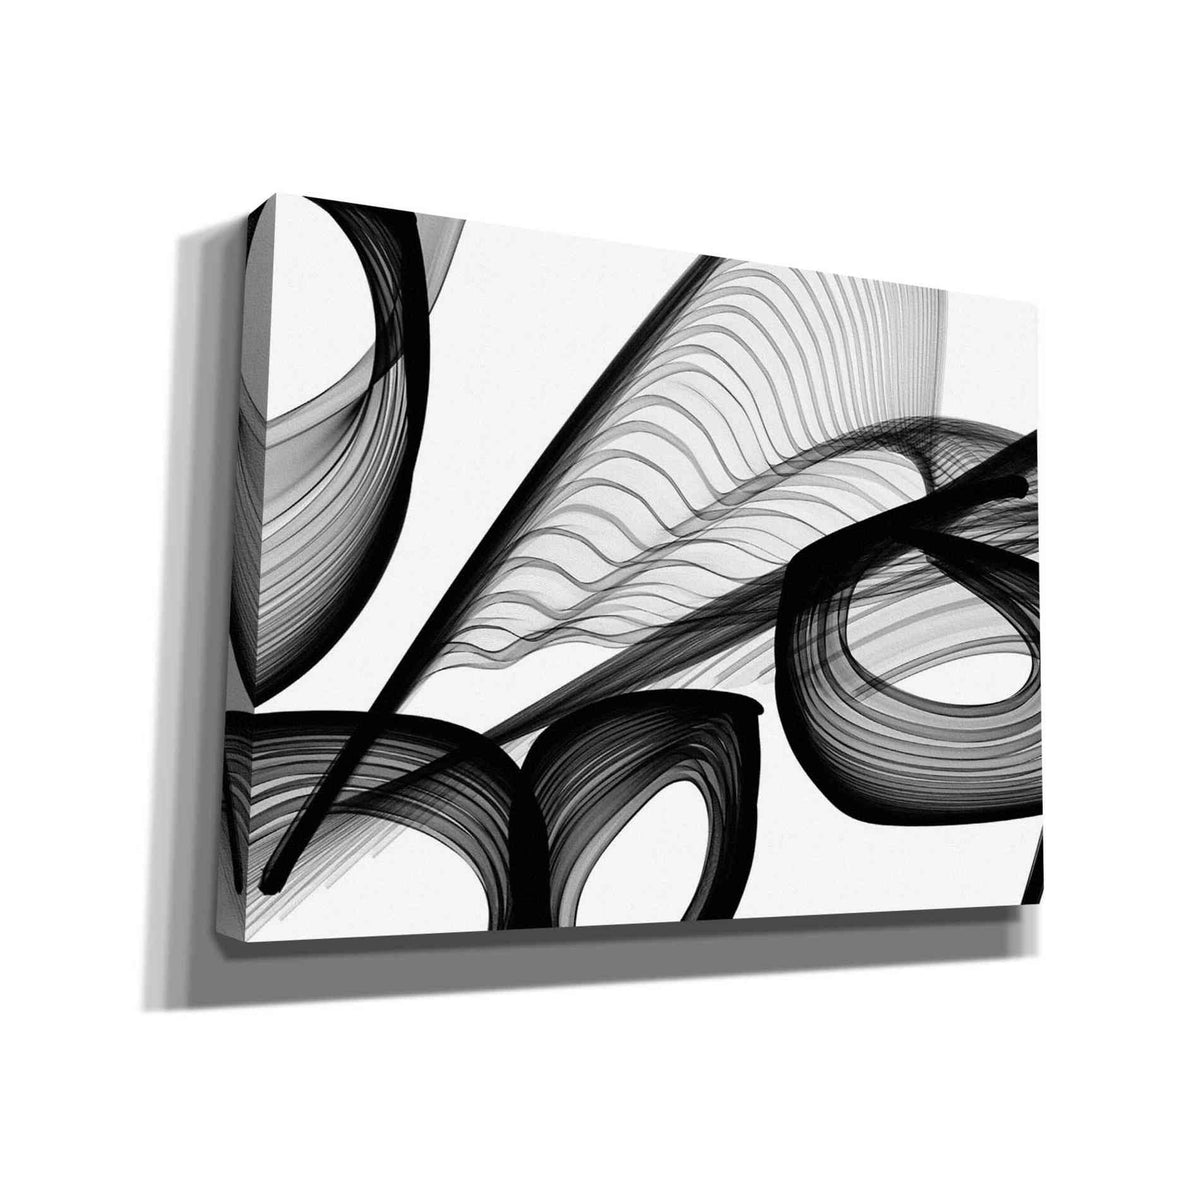 Epic Graffiti &#39;Abstract Black and White 22-21&#39; by Irena Orlov, Giclee Canvas Wall Art